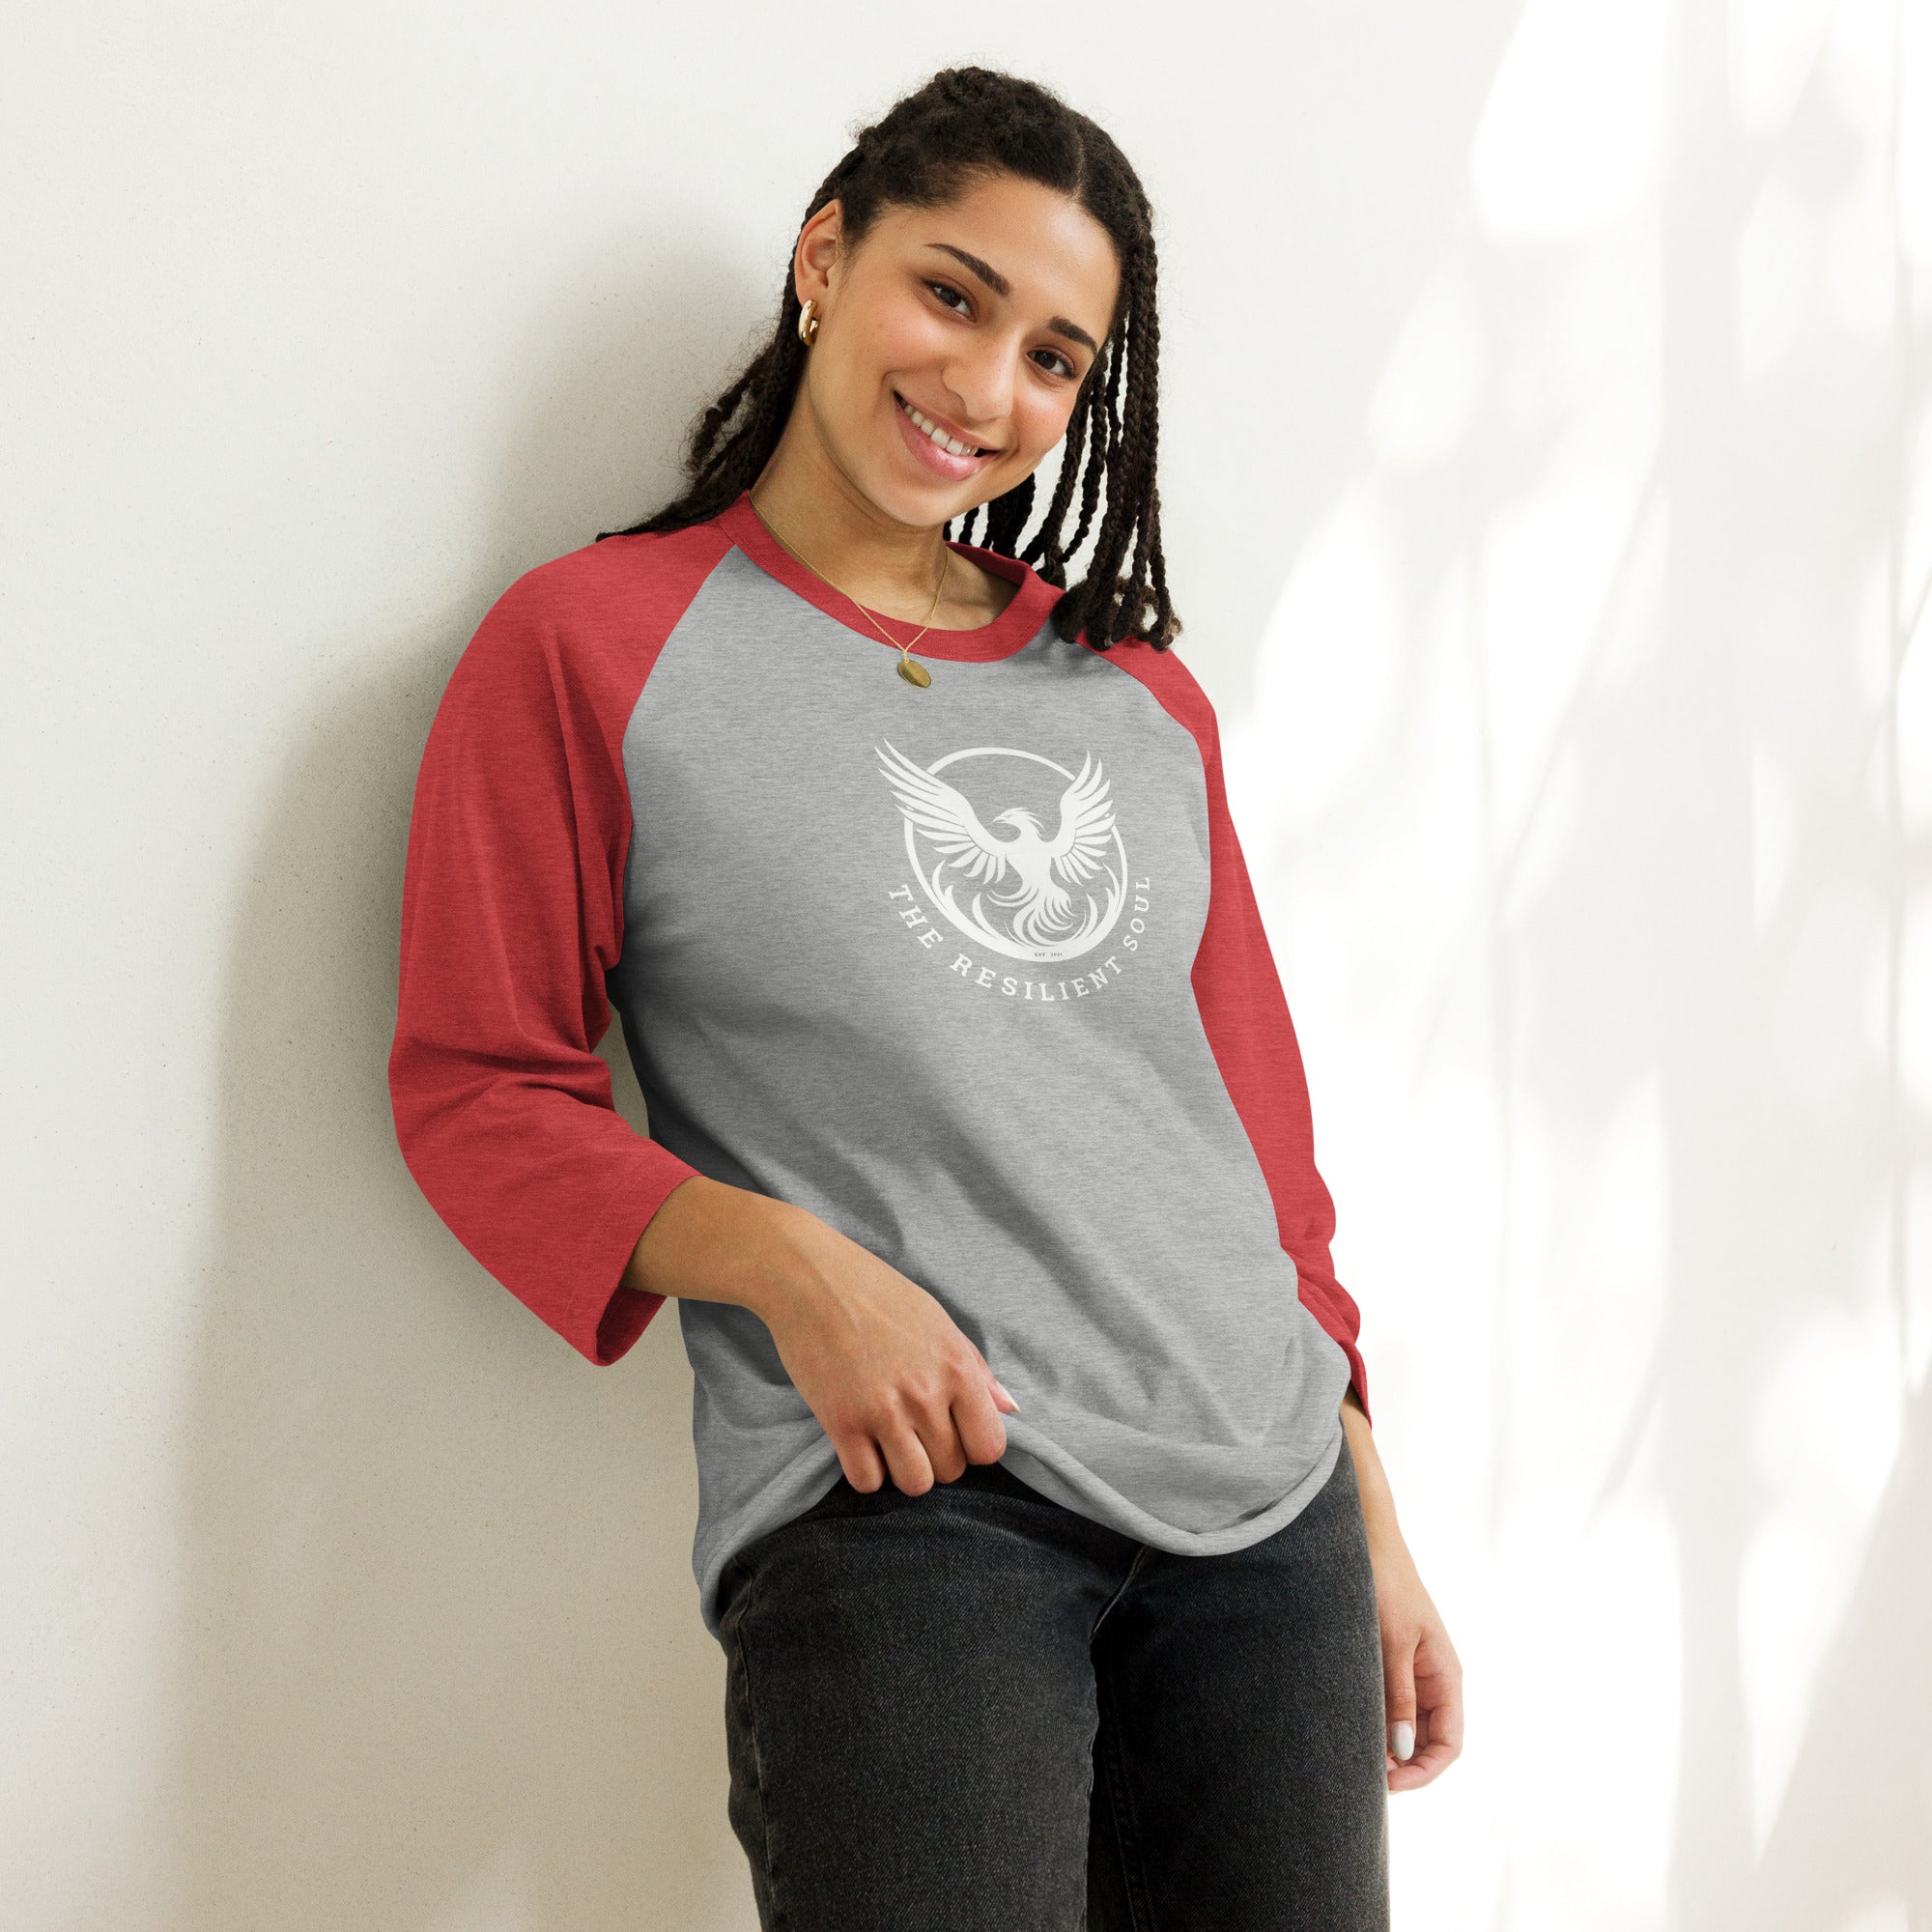 The Resilient Soul 3/4 sleeve raglan shirt - My Store